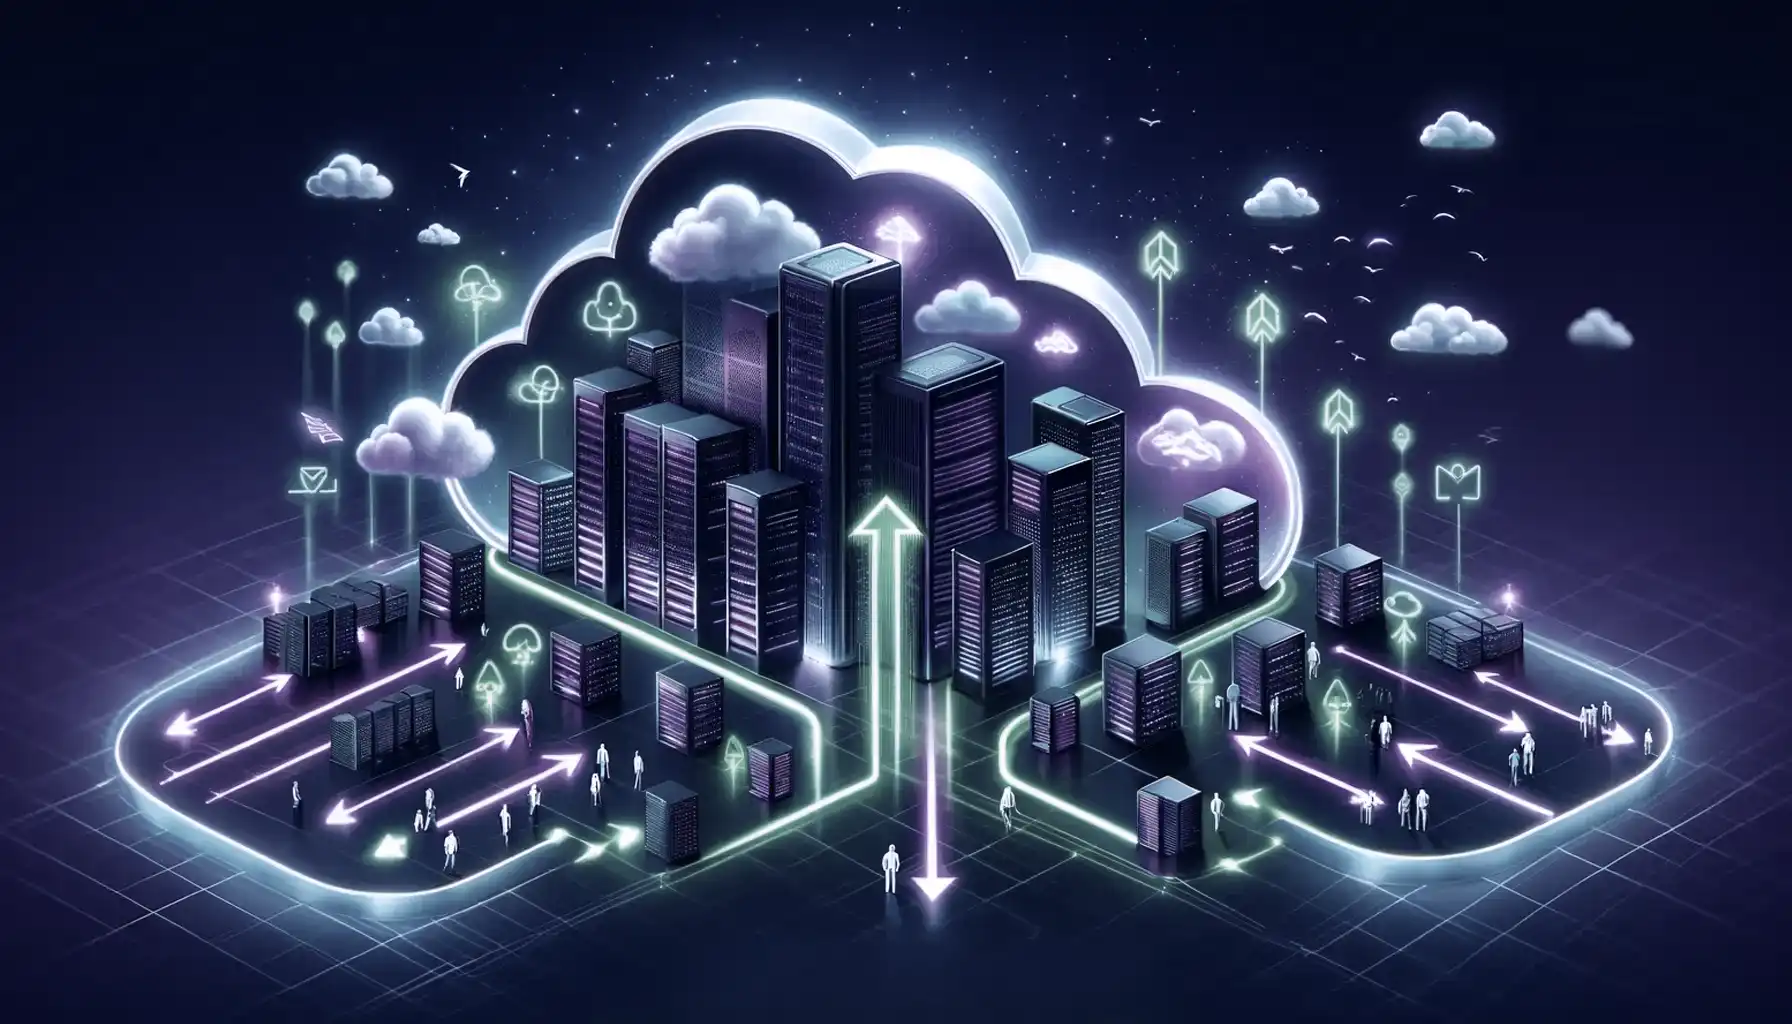 This 16x9 image vividly showcases the benefits of cloud management services offered by NexGenTek. It depicts a seamless transition from traditional IT infrastructure to a modern, cloud-based environment, illustrated by a cityscape where the buildings are connected by flowing purple and green neon lights. These lights lead from grounded servers towards expansive cloud icons above, indicating the journey of cloud migration and adoption strategies. The image symbolizes the transformation, scalability, and efficiency that cloud management services provide, highlighting NexGenTek's comprehensive approach and expertise in cloud solutions. The overall aesthetic conveys innovation and the forward momentum of businesses embracing cloud technology.